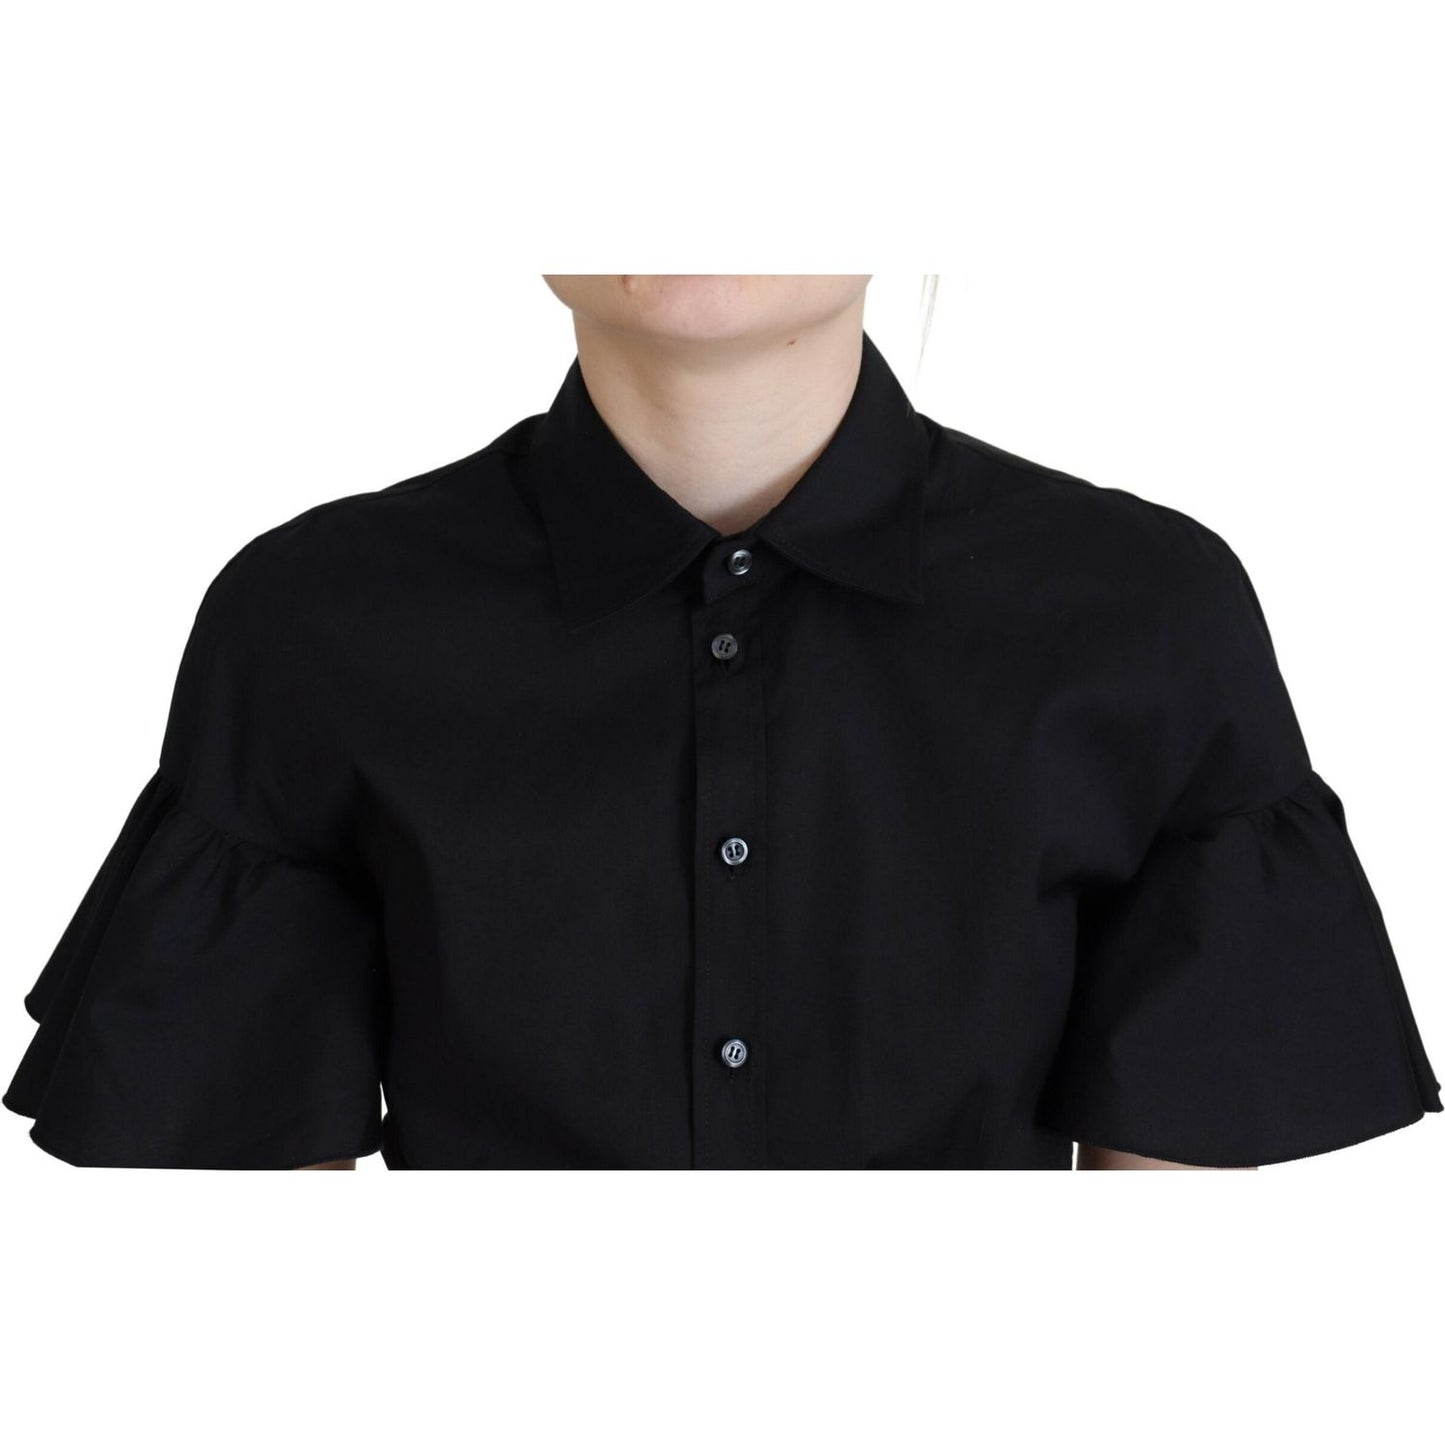 Dsquared² Black Collared Button Down Short Sleeve Cropped Top black-collared-button-down-short-sleeve-cropped-top